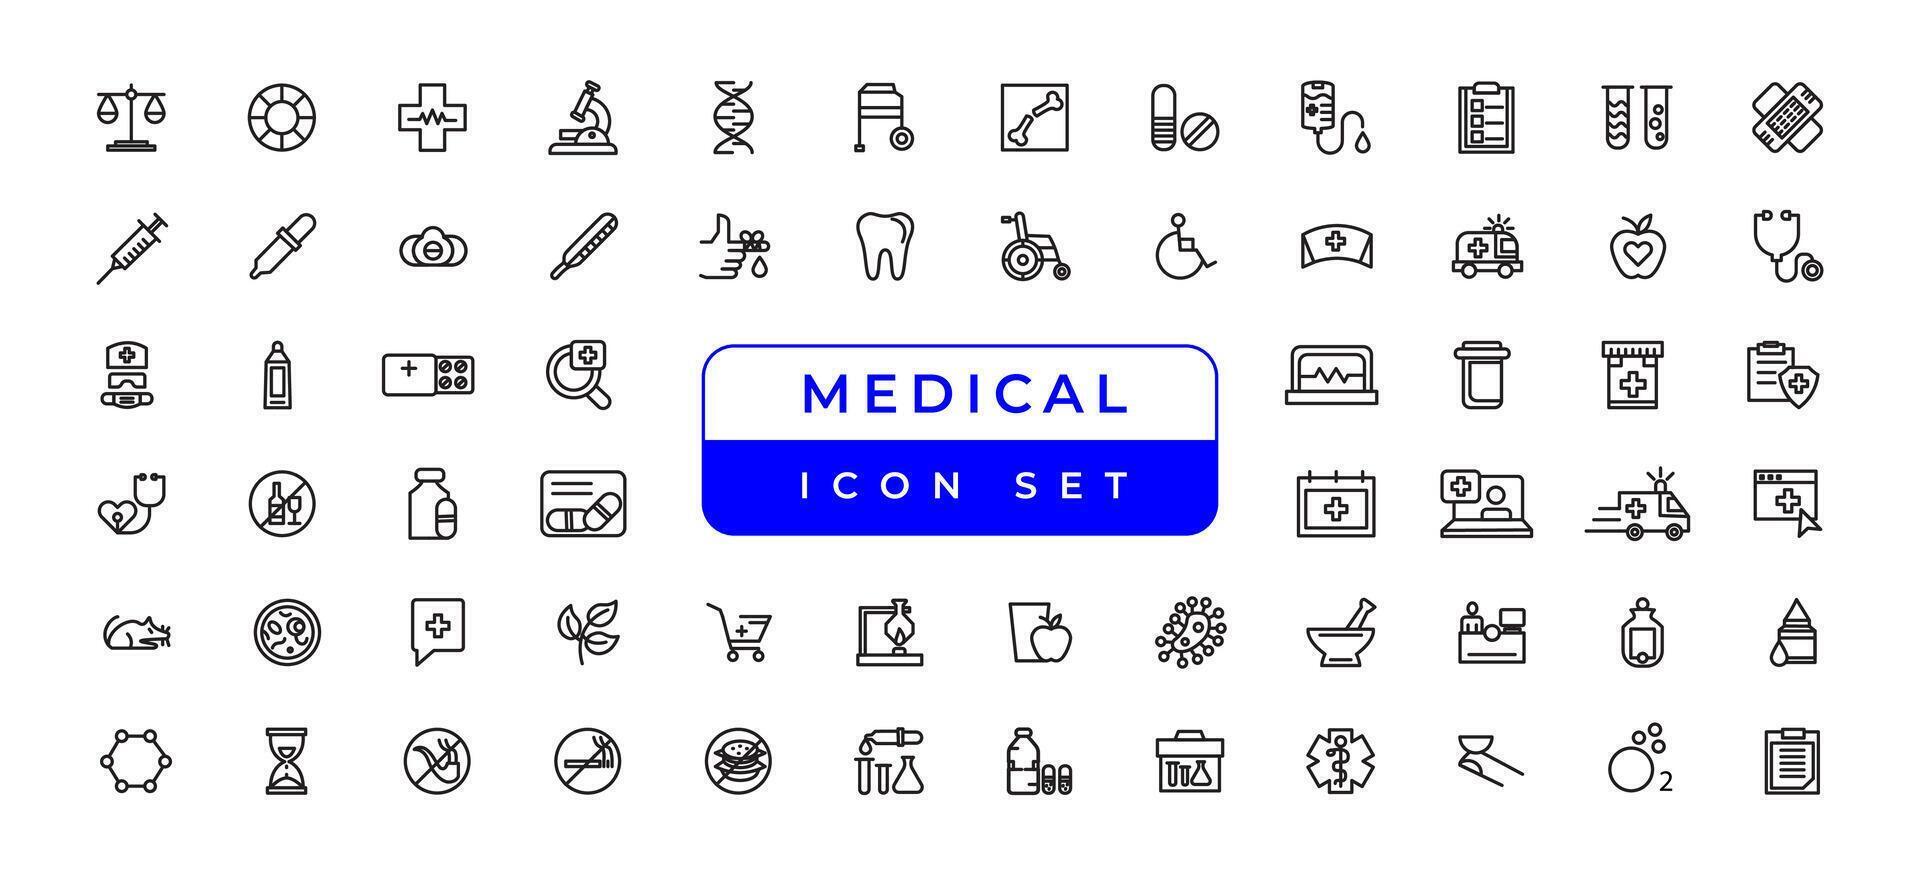 Medicine and Health symbols - minimal thin line web icon set. Outline icons collection. Simple vector illustration